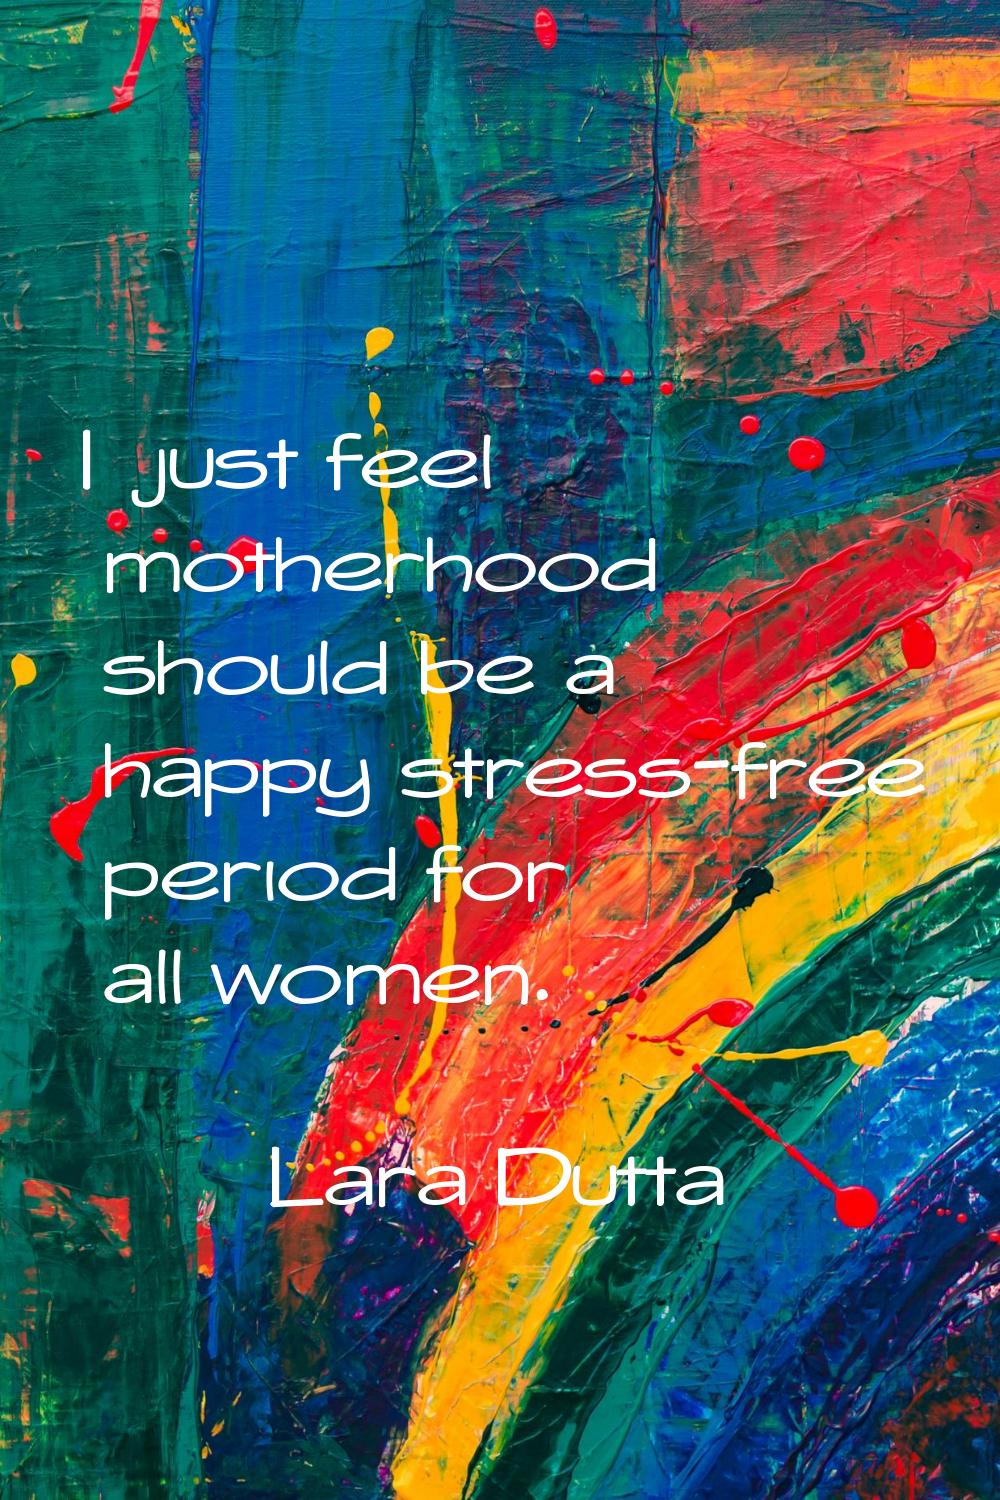 I just feel motherhood should be a happy stress-free period for all women.